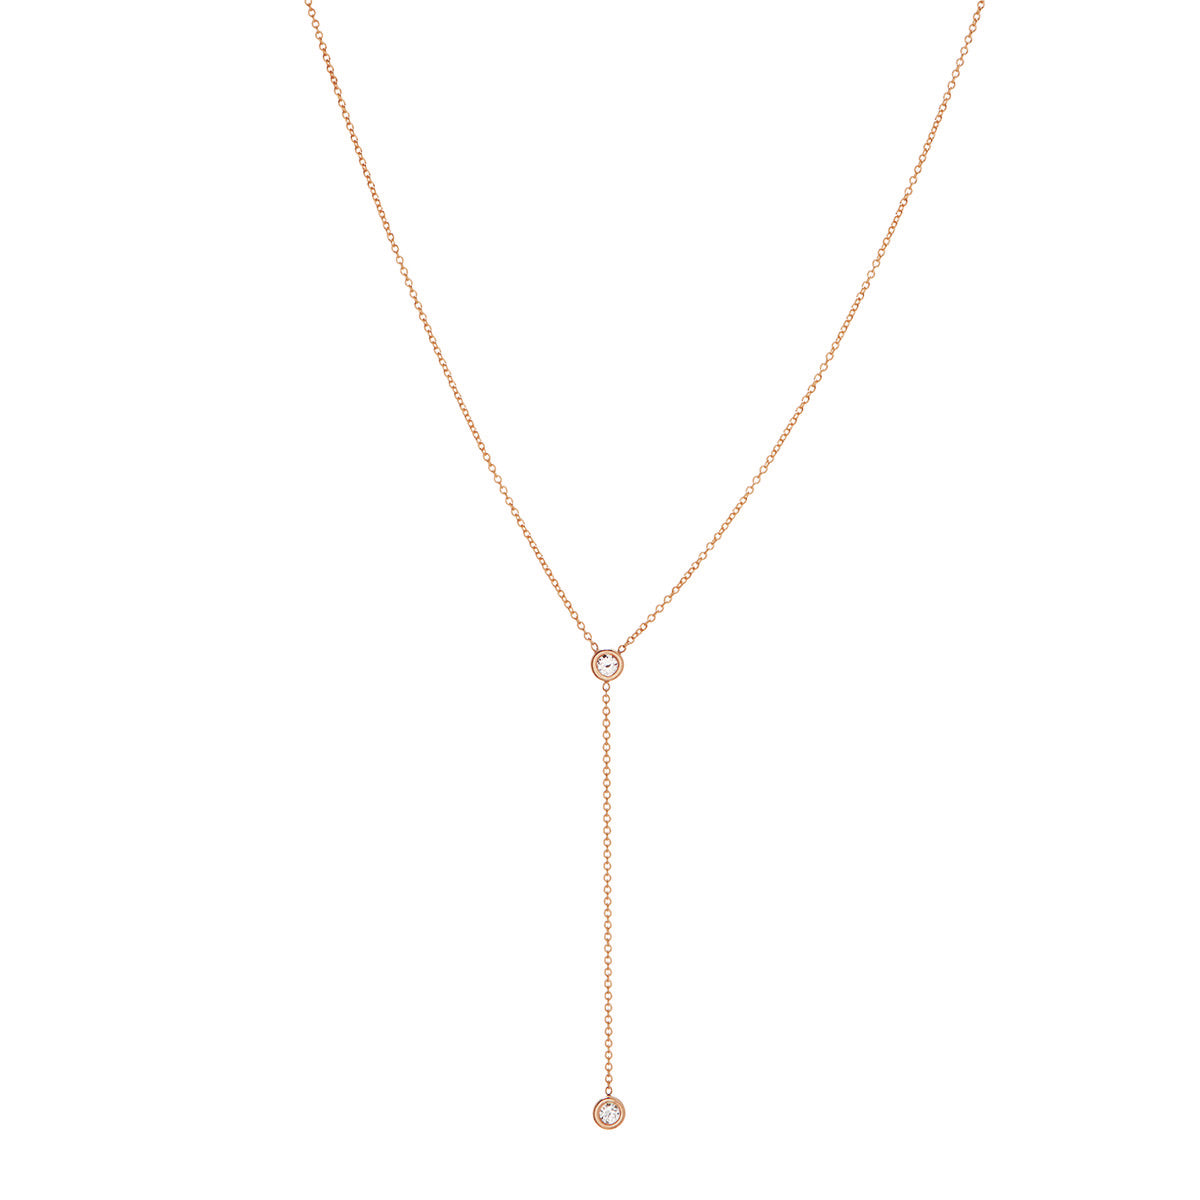 Gold And Diamond Lariat Necklace Available For Immediate Sale At